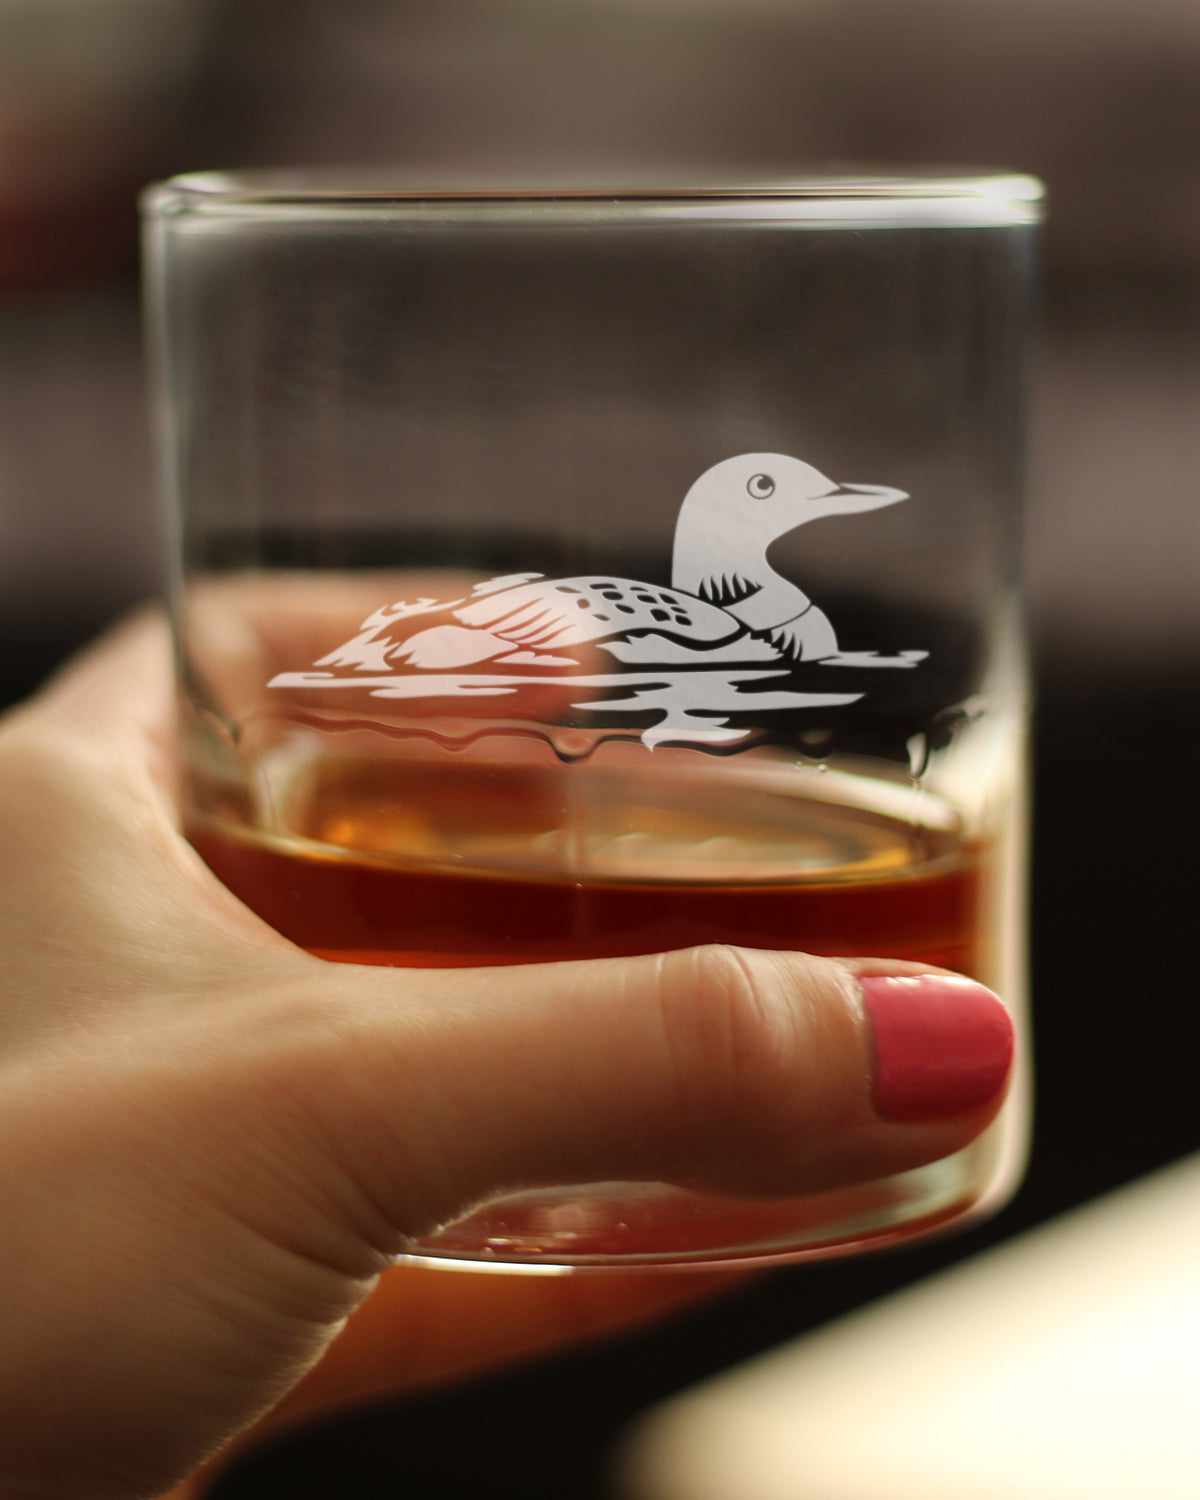 Loon Whiskey Rocks Glass - Fun Bird Themed Gifts and Decor for Men &amp; Women - 10.25 Glasses